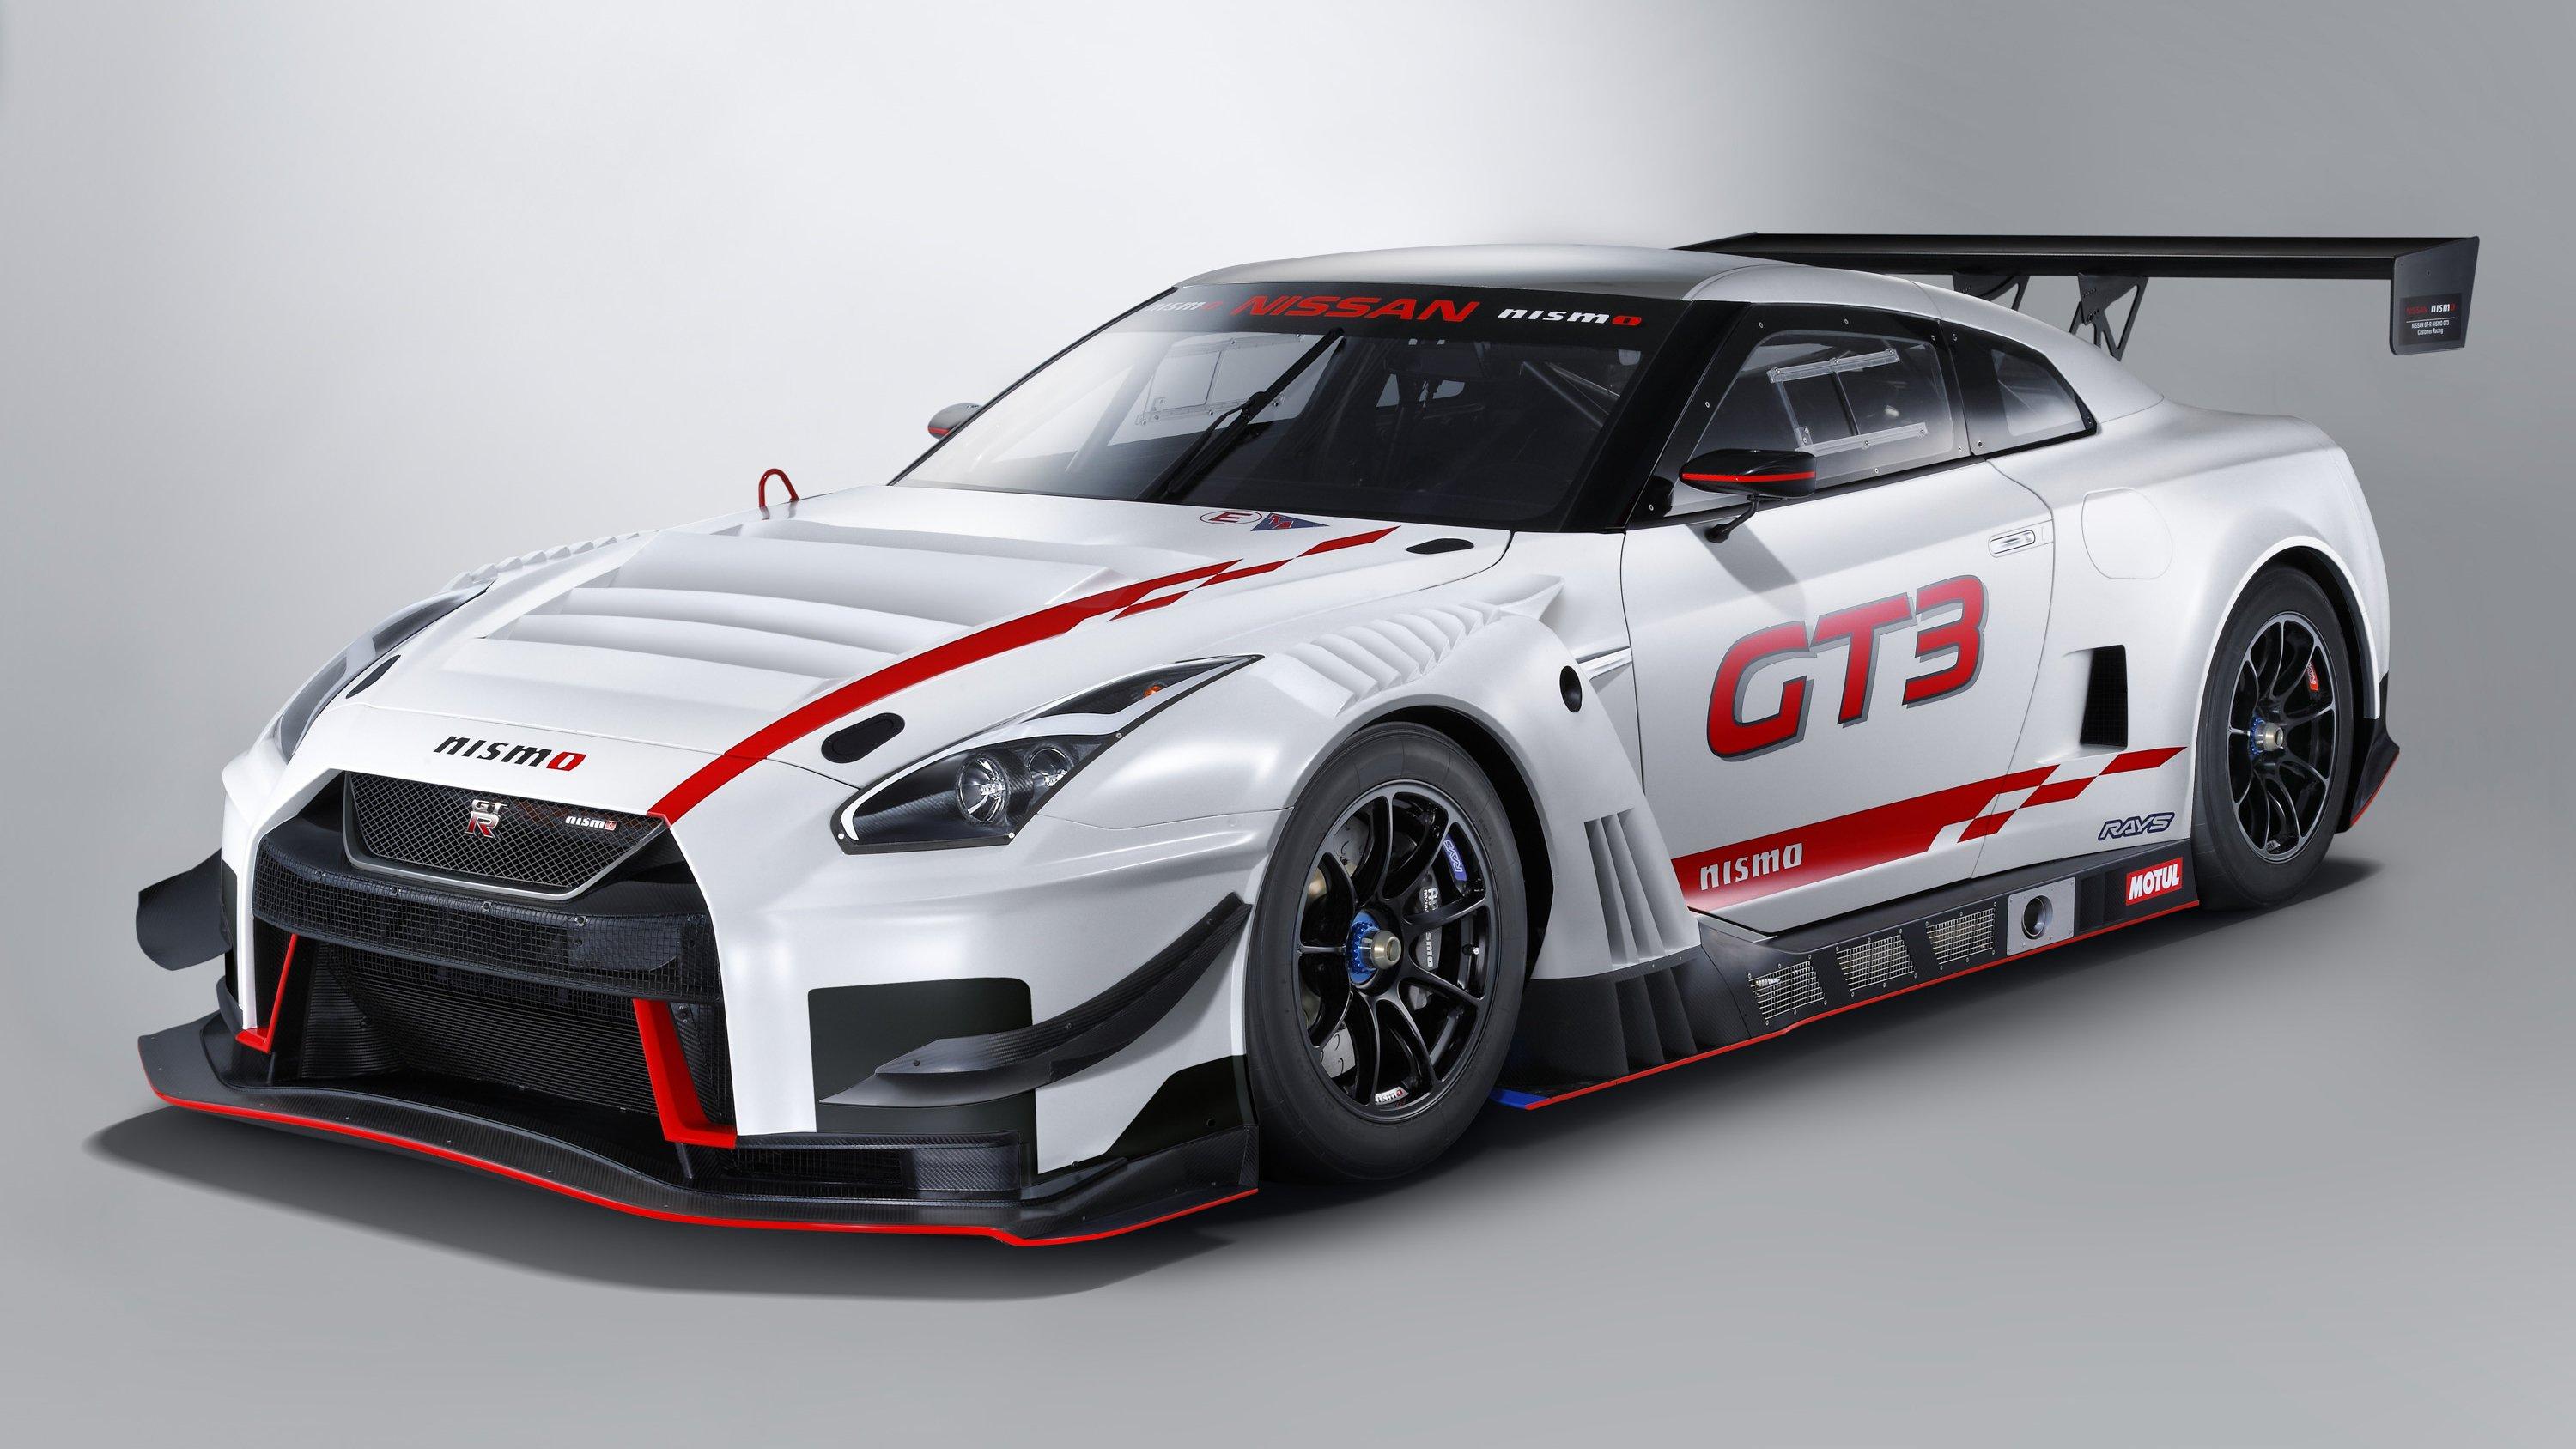 Nissan GT R NISMO GT3 Picture, Photo, Wallpaper